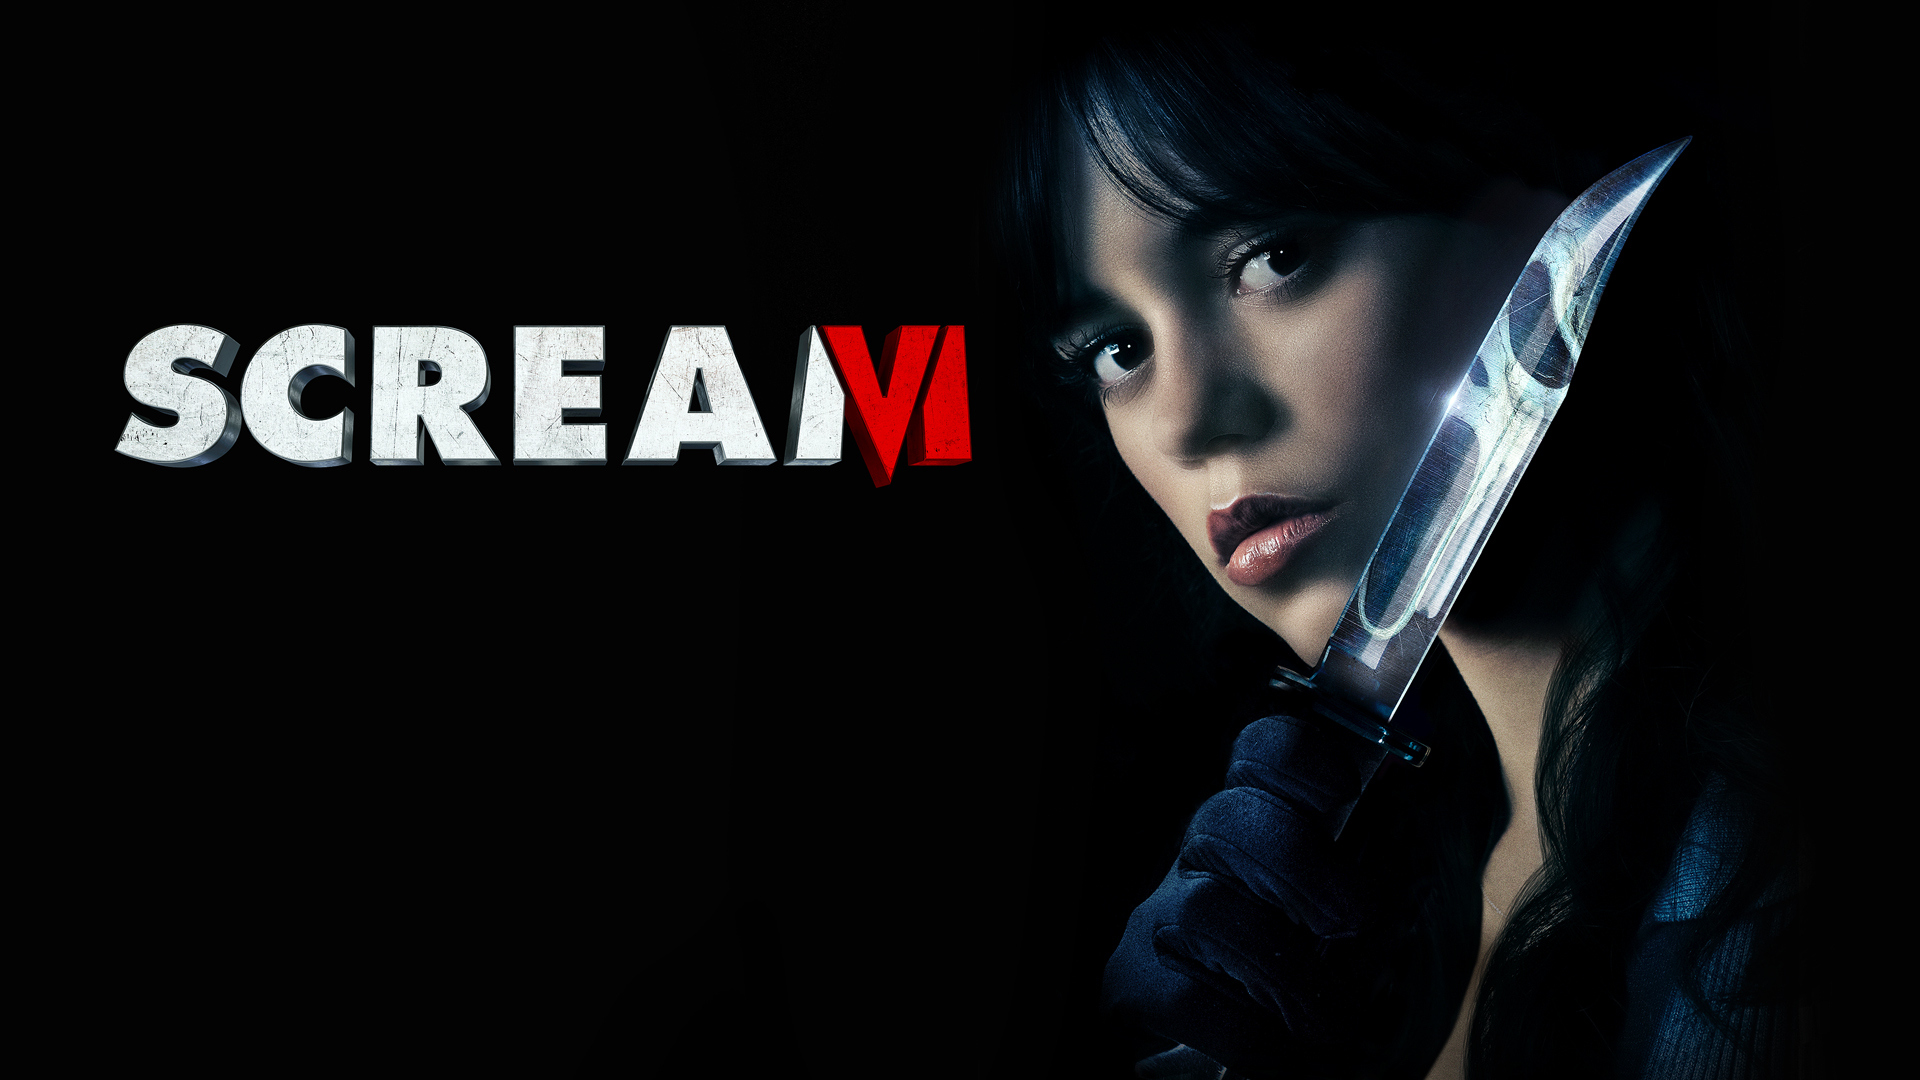 Scream 6” Is Now Available On UK Streaming [Updated]